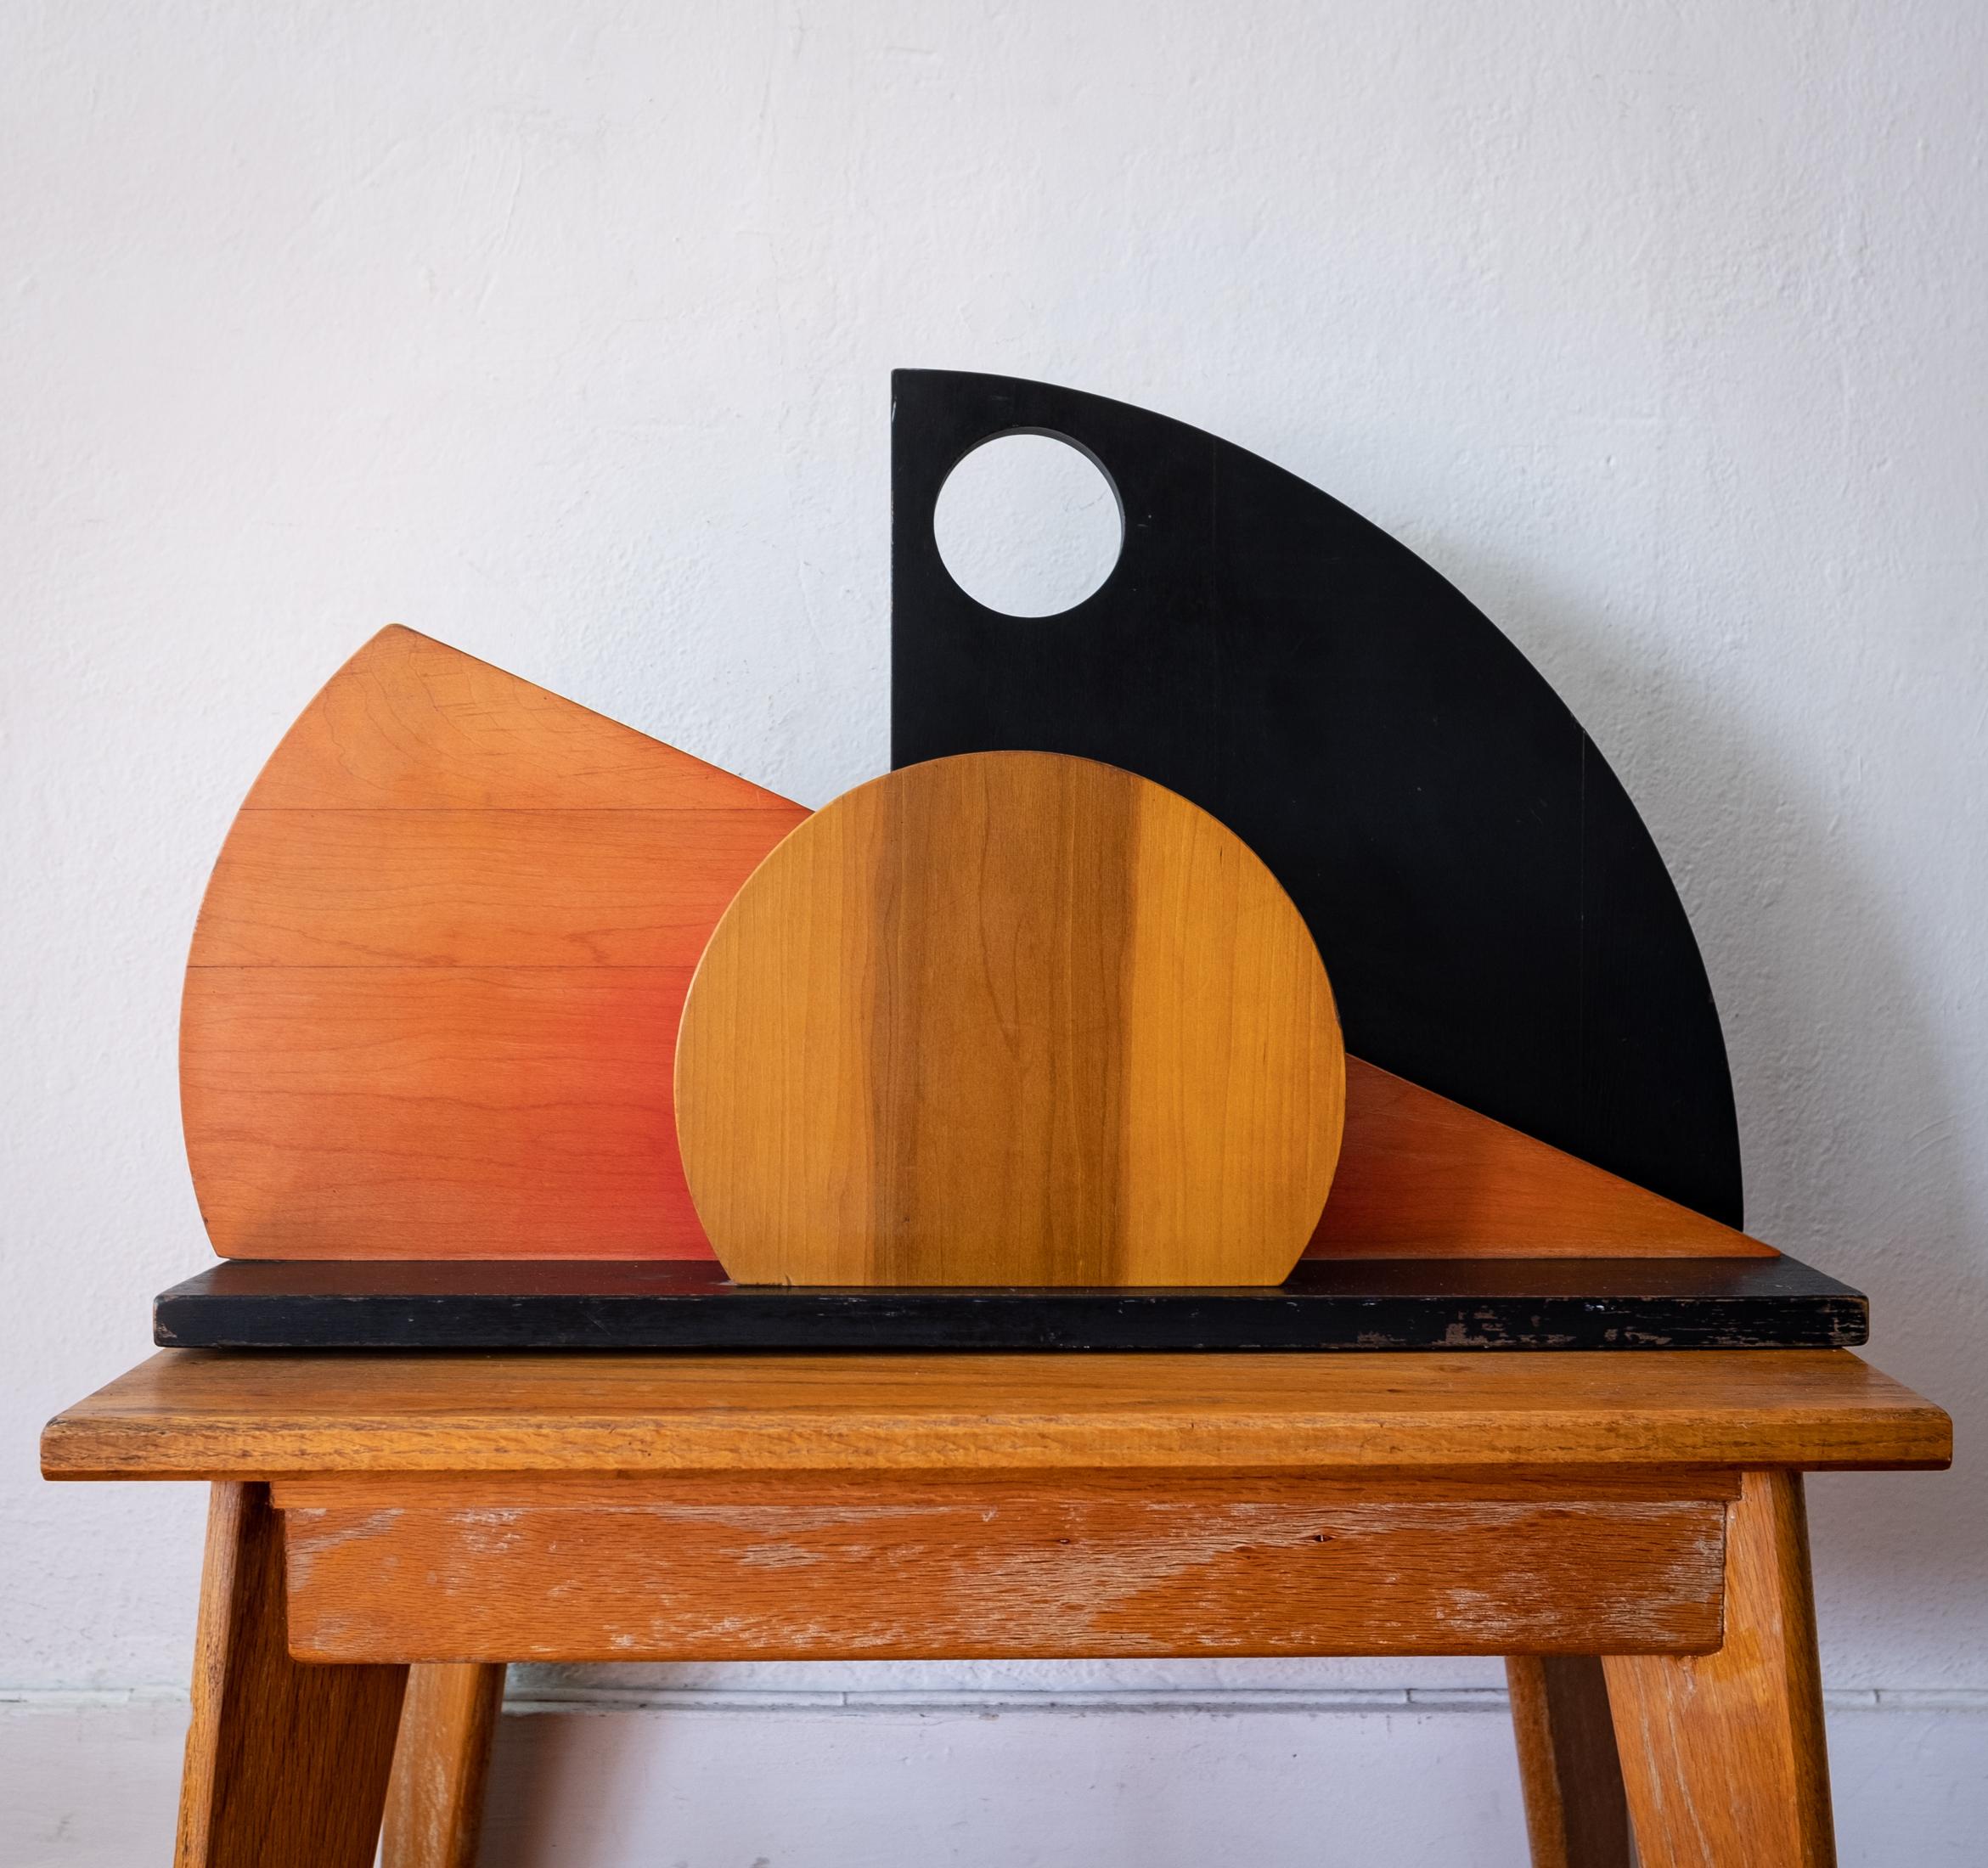 Postmodern abstract wood sculpture from the 1980s. Artist made with aniline black and red dyes. Unsigned.